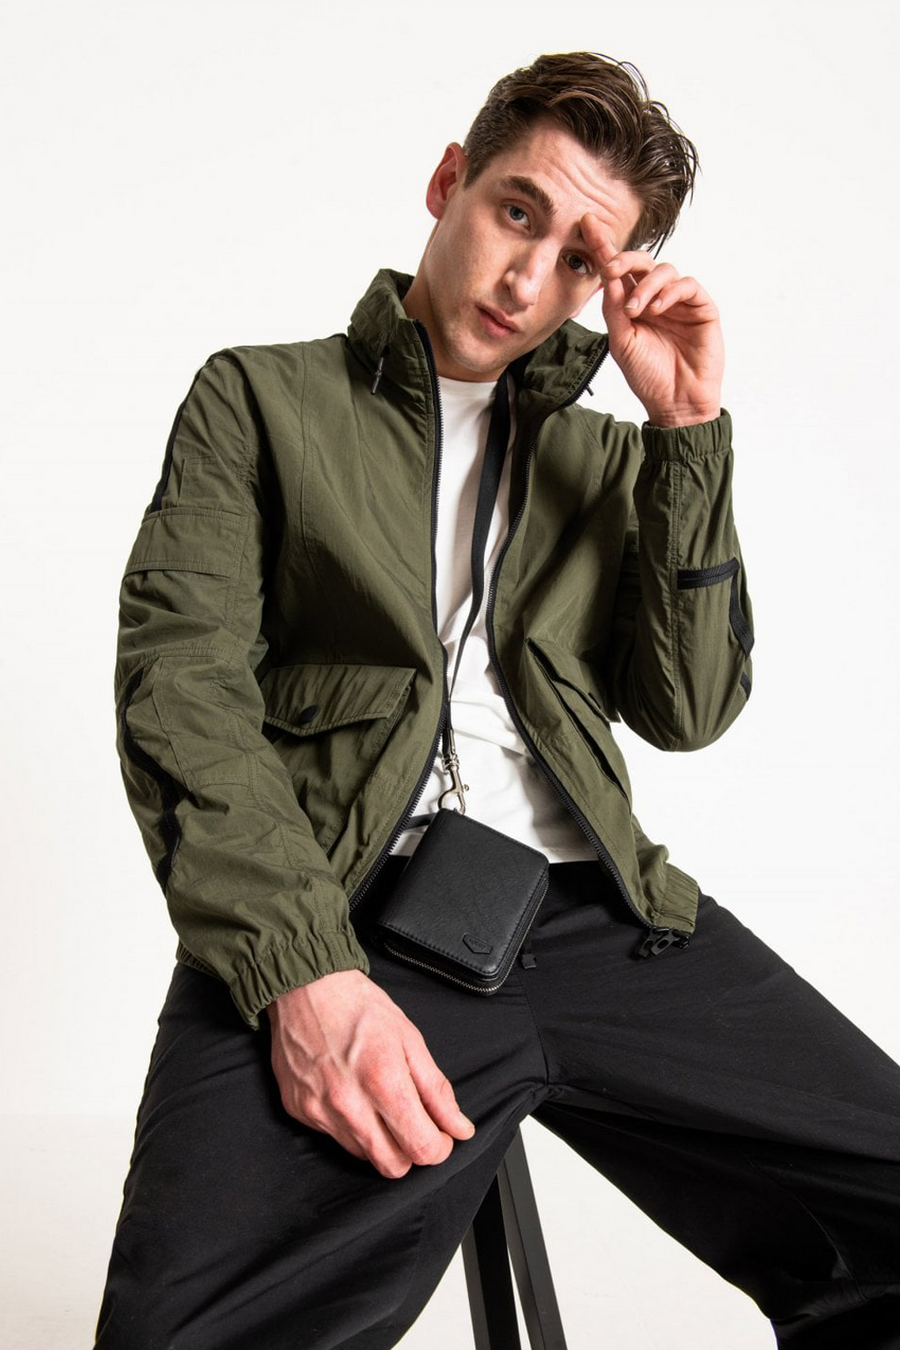 Buy the Antony Morato Multi Pocket Bomber Jacket Khaki at Intro. Spend £50 for free UK delivery. Official stockists. We ship worldwide.